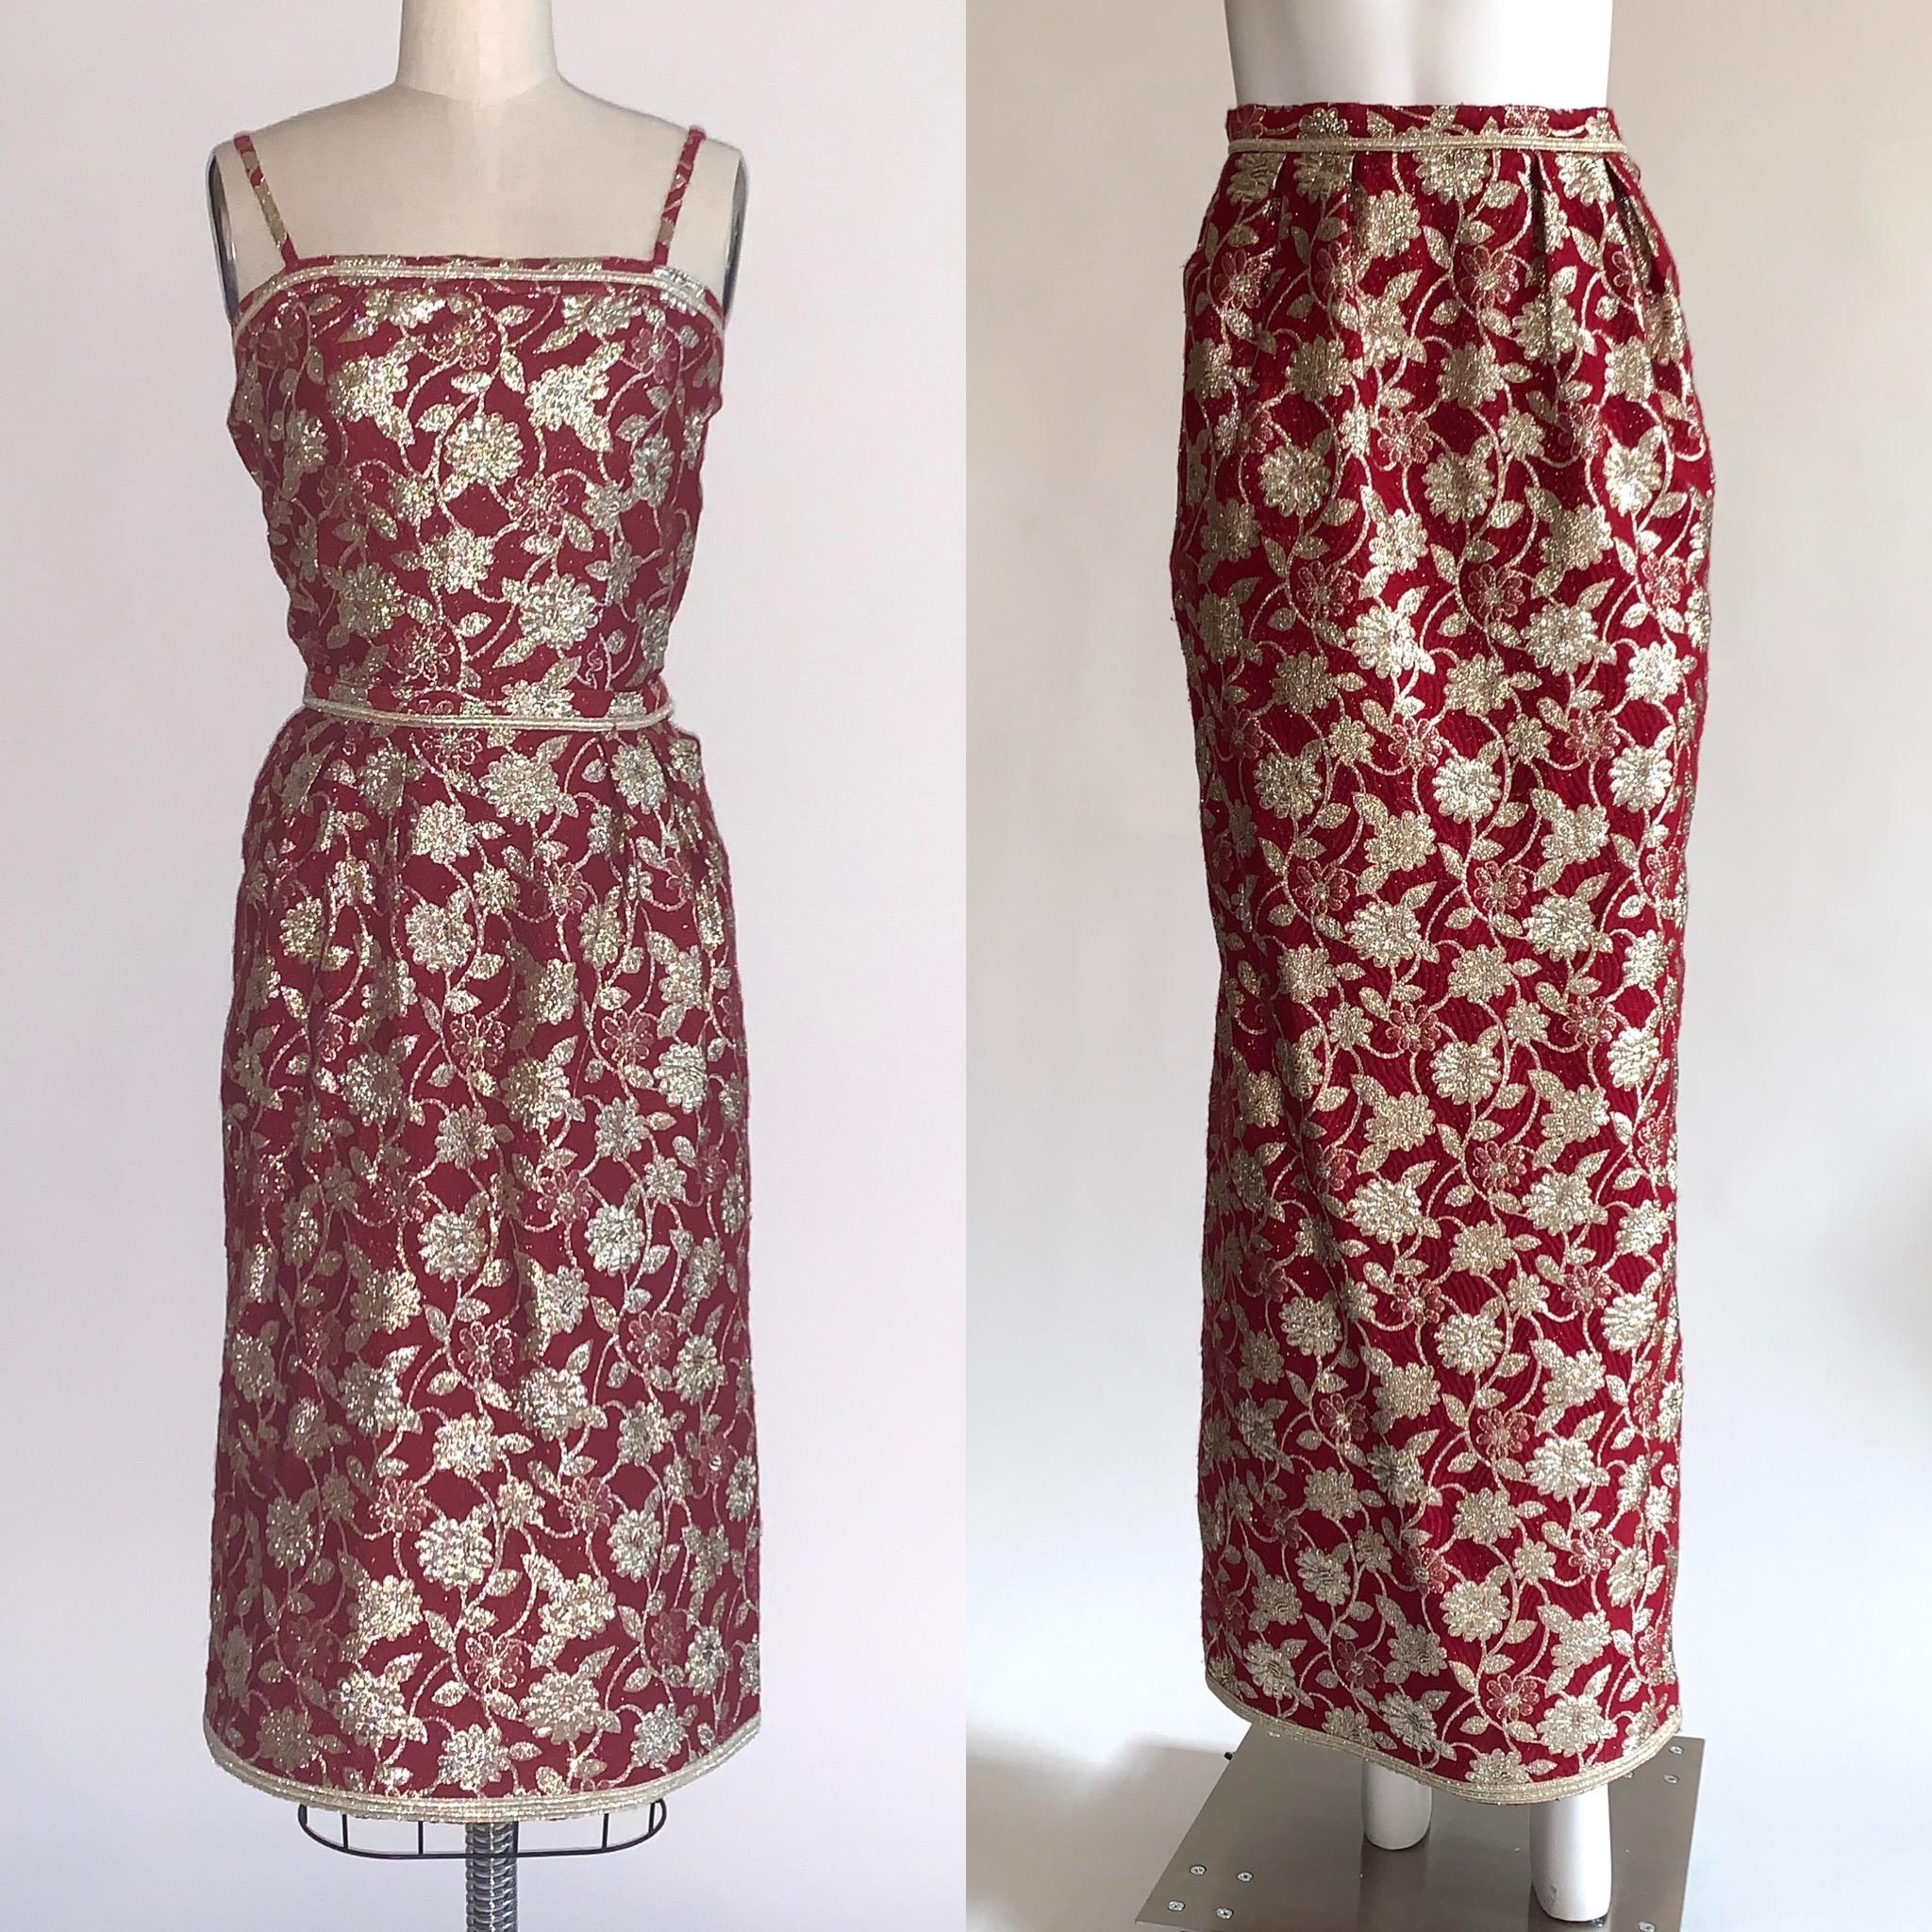 Three piece vintage Adolfo burgundy red and metallic floral brocade skirt(s) and top set, circa 1970s- 80s, ensures you're set for any occasion! Pair the the bodice with the long skirt for formal events, or the shorter skirt for cocktails! (Or pair